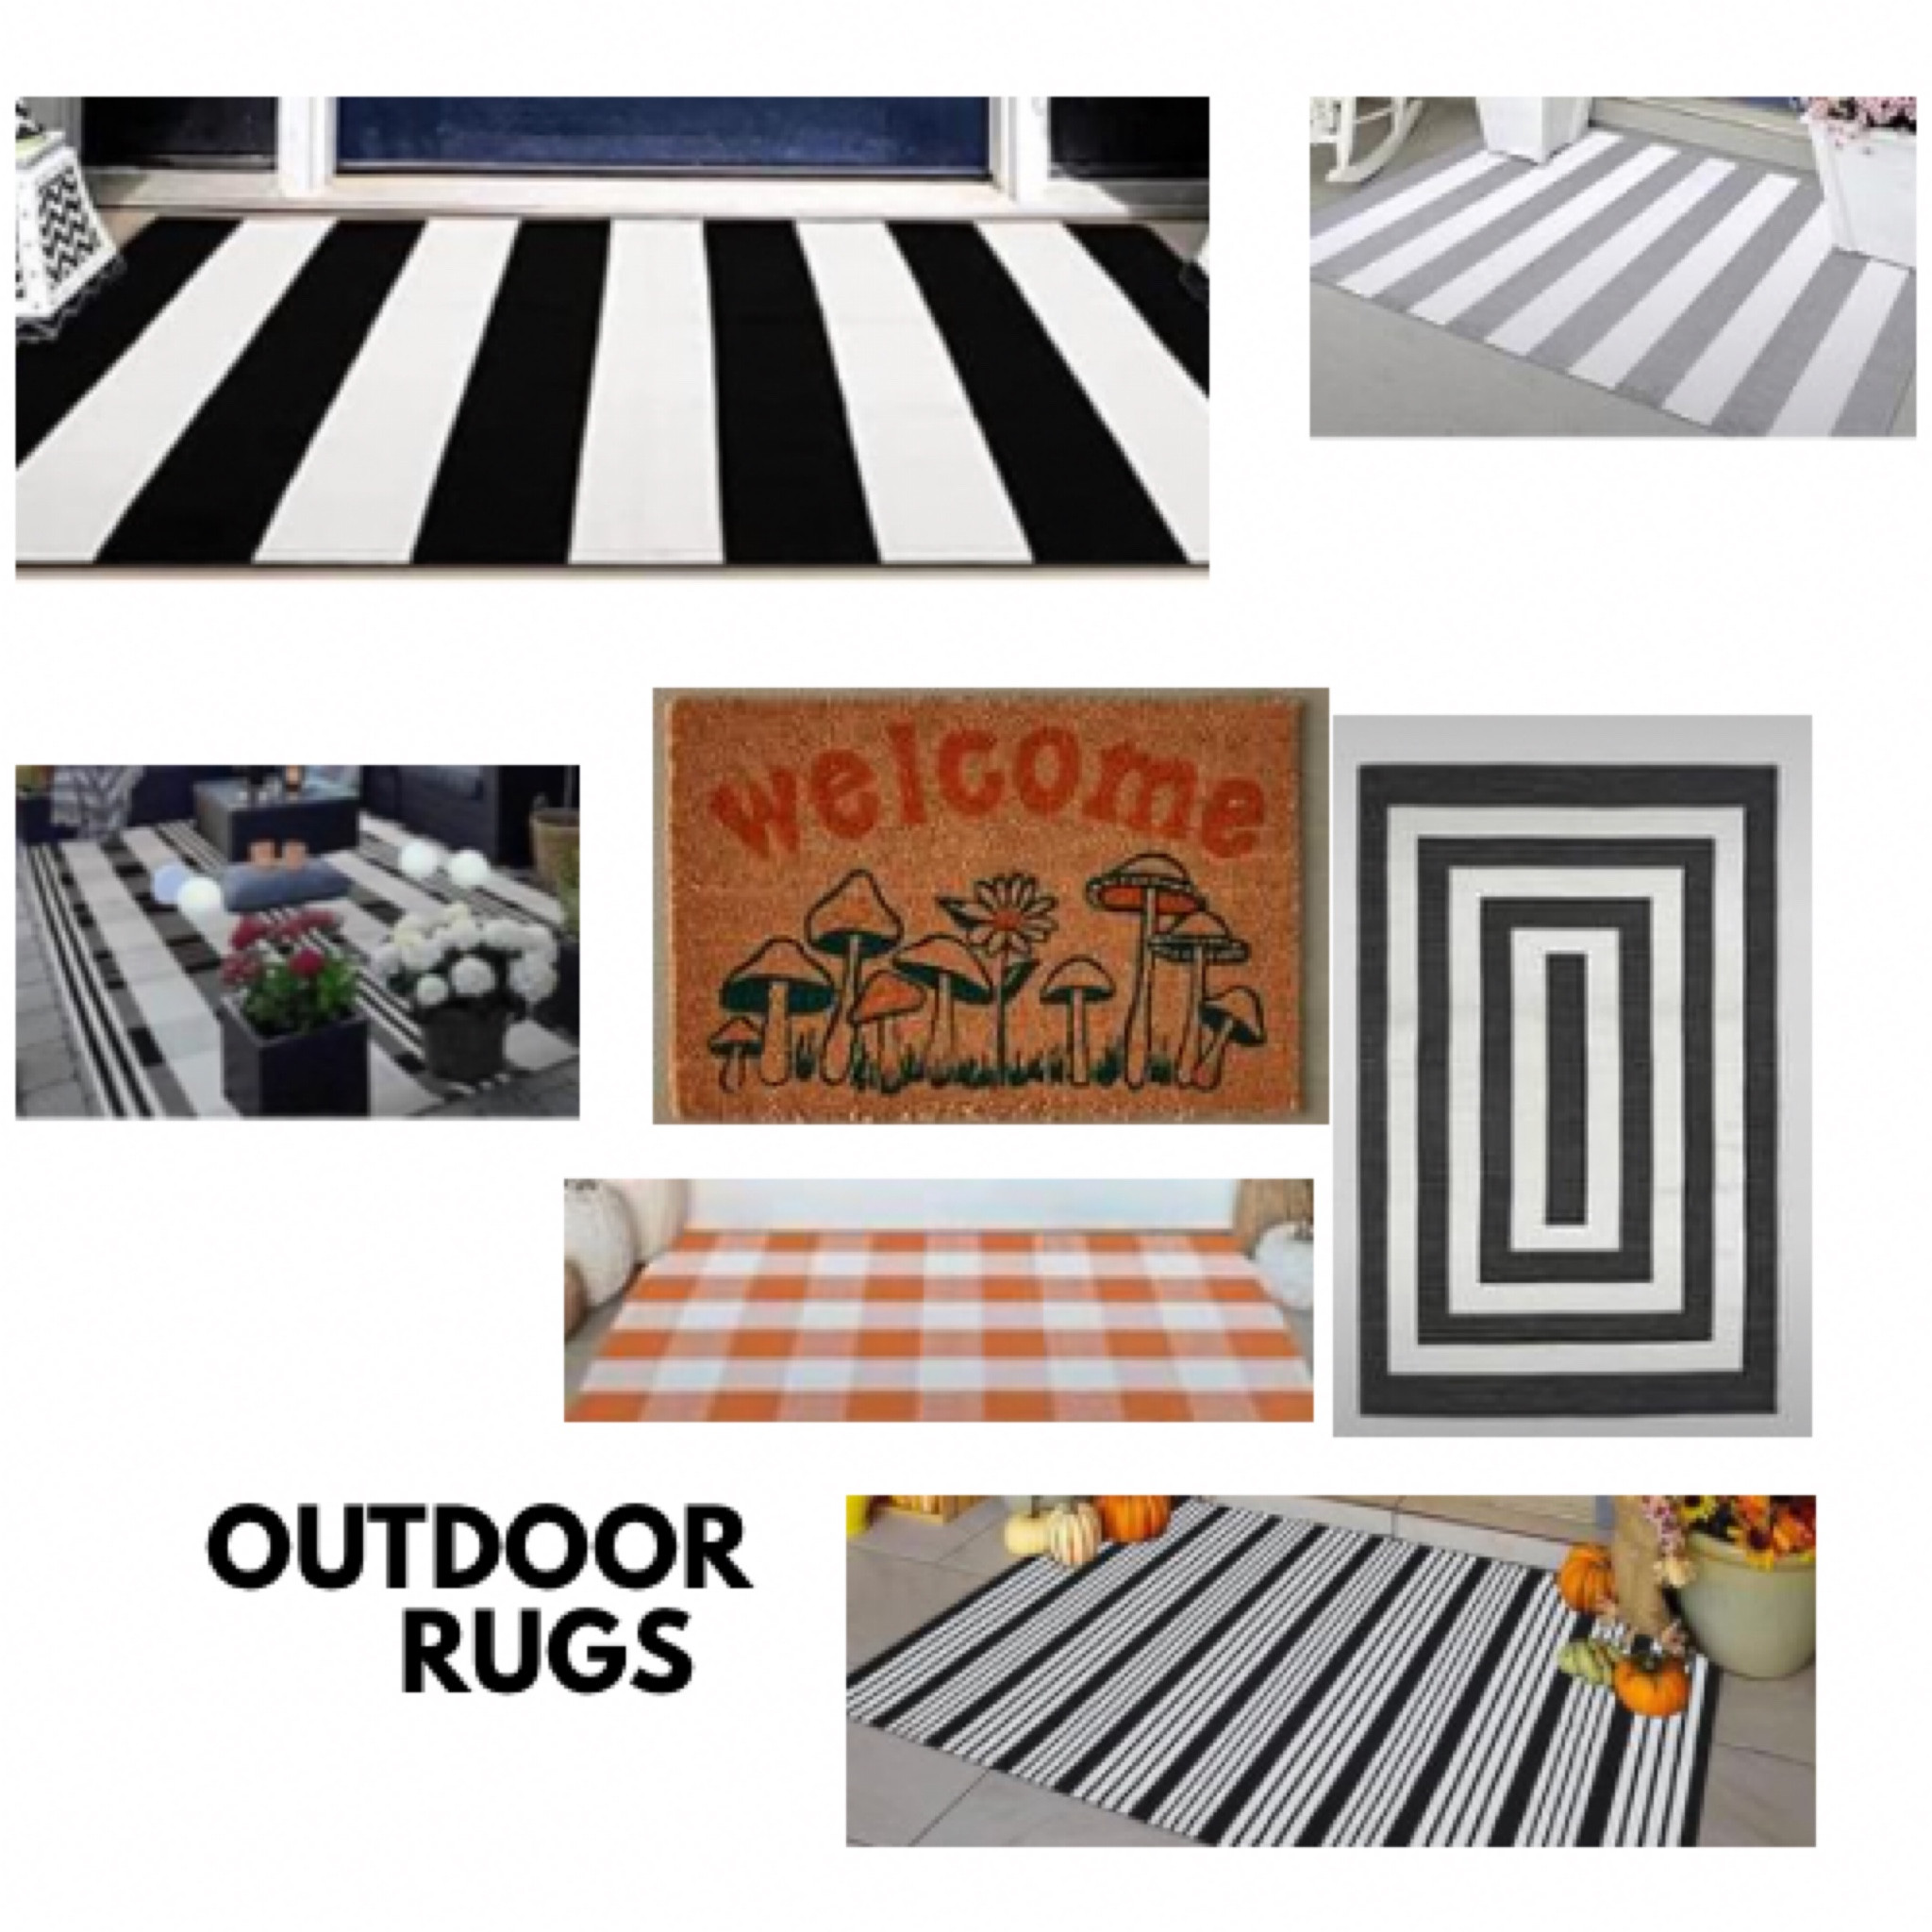 KOZYFLY Striped Outdoor Rug 27.5x43 Inches Front Door Rug Gray and White  Hand Woven Cotton Washable Outdoor Doormats Outdoor Entrance Mat for Front